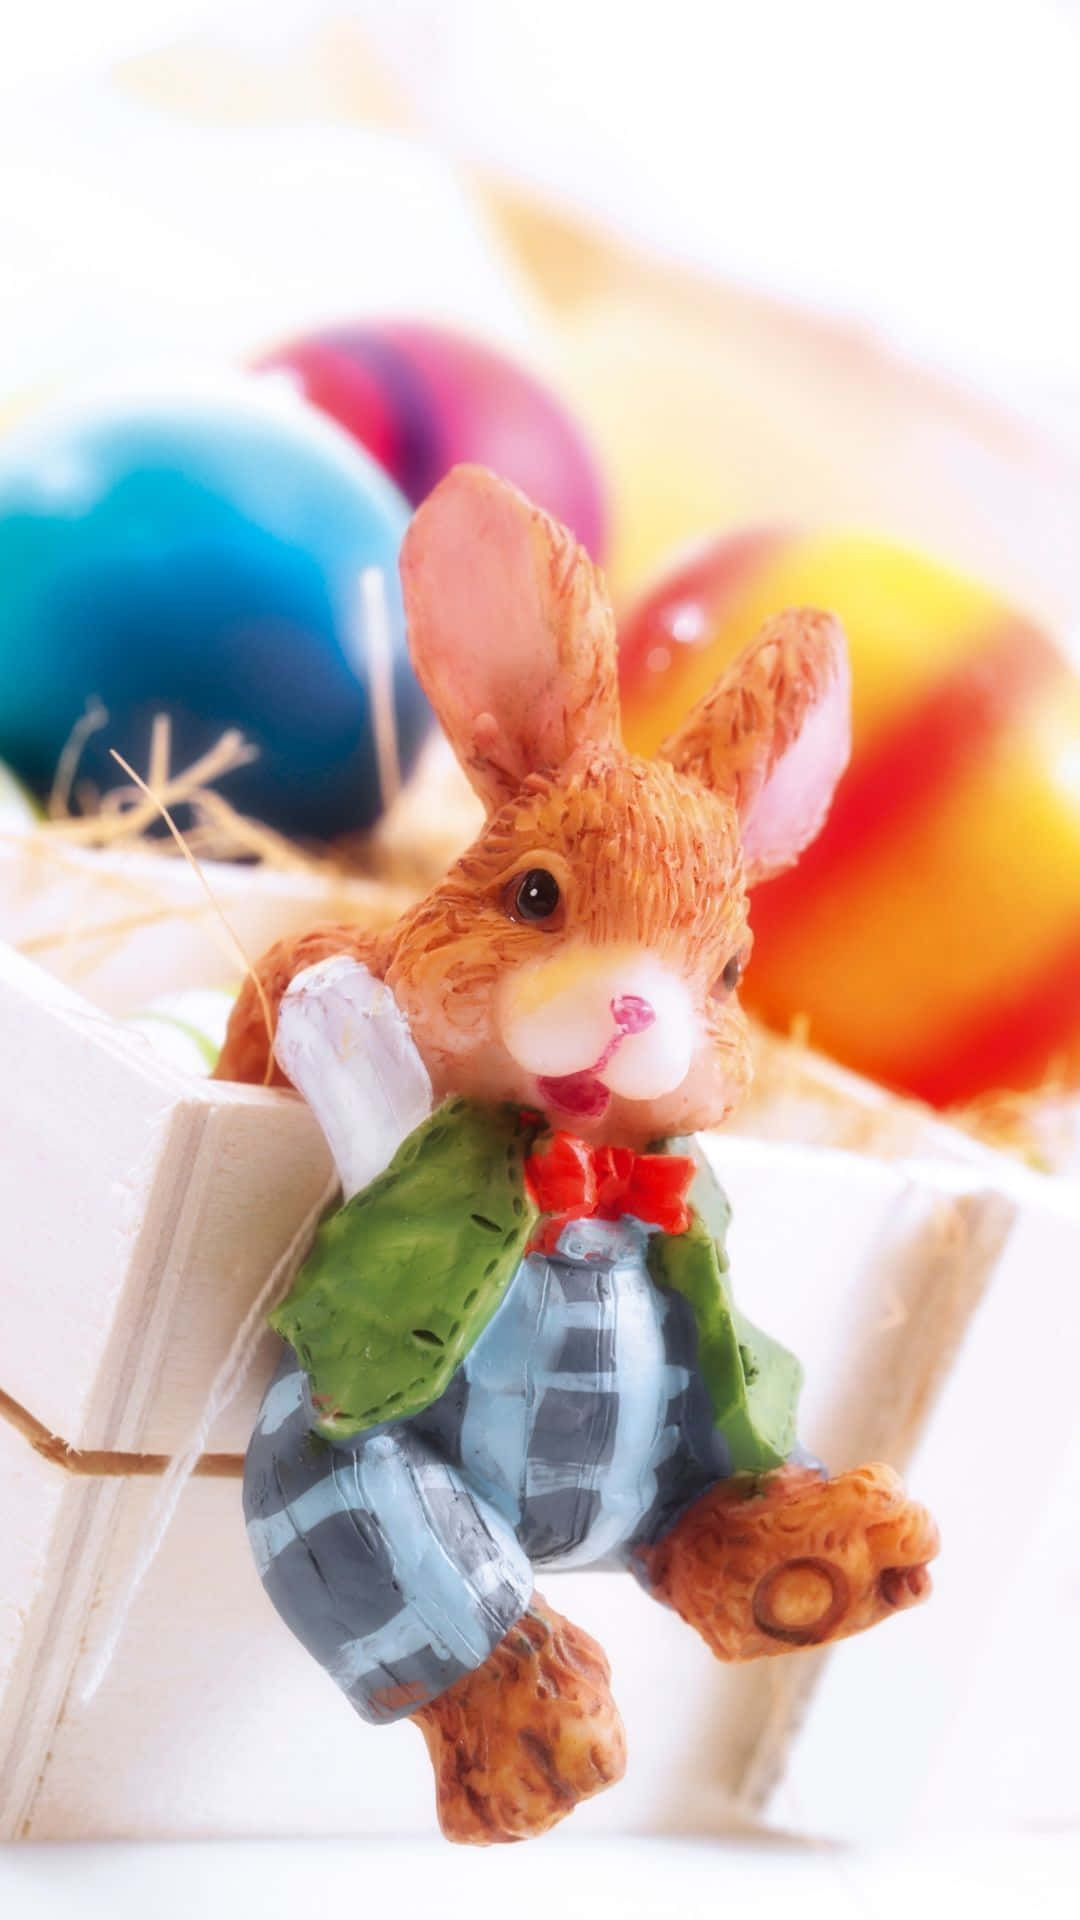 Caption: Delightful Easter Bunny with Colorful Eggs Wallpaper